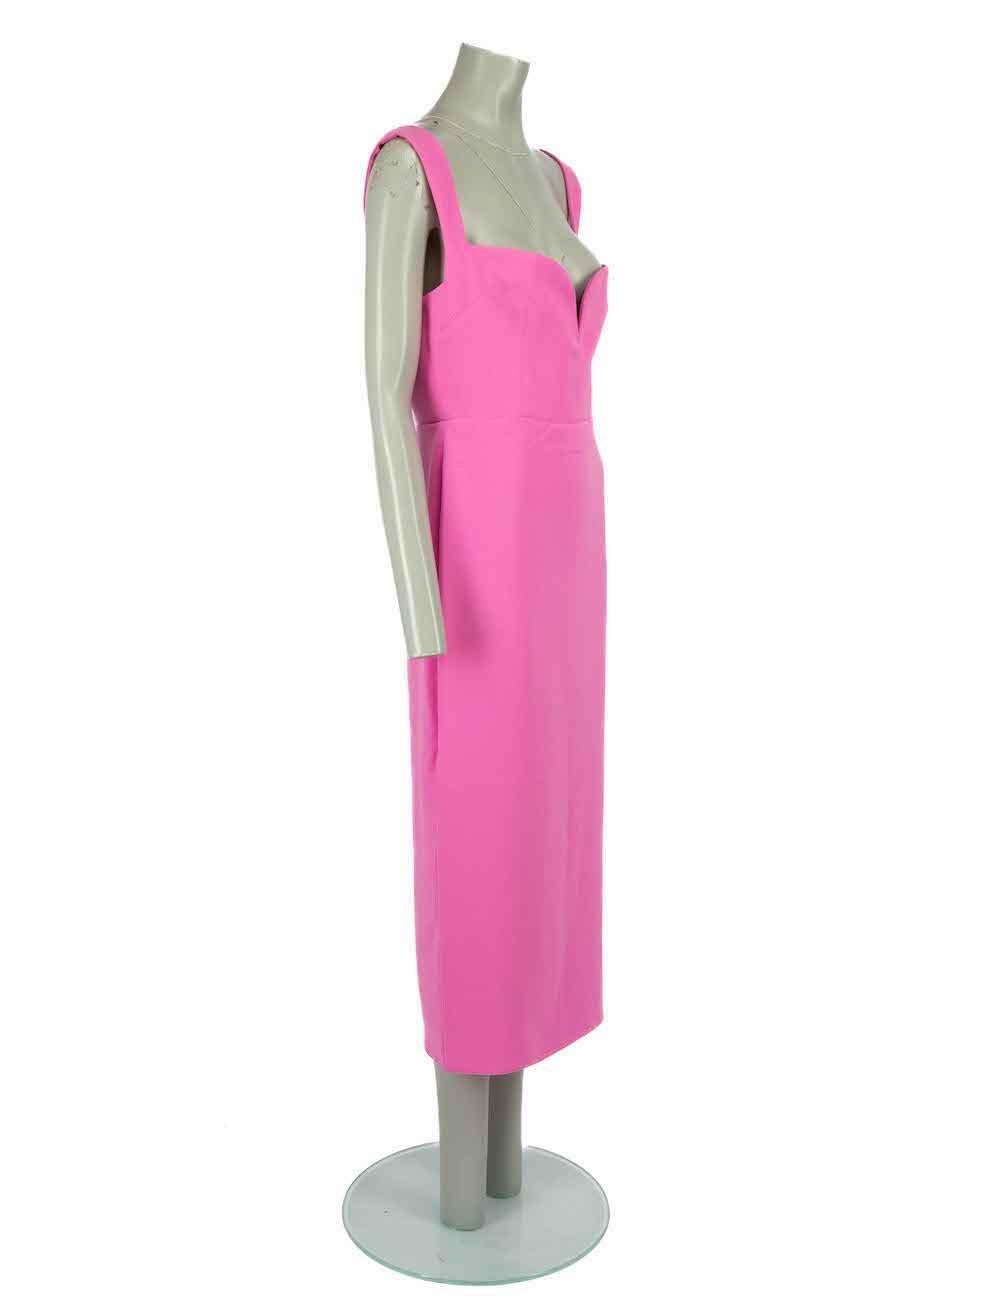 CONDITION is Very good. Hardly any visible wear to dress is evident on this used Alex Perry designer resale item.

Details
Pink
Polyester
Dress
Sleeveless
Sweetheart neckline
Boned bodice
Midi
Back zip fastening

Made in China

Composition
63%